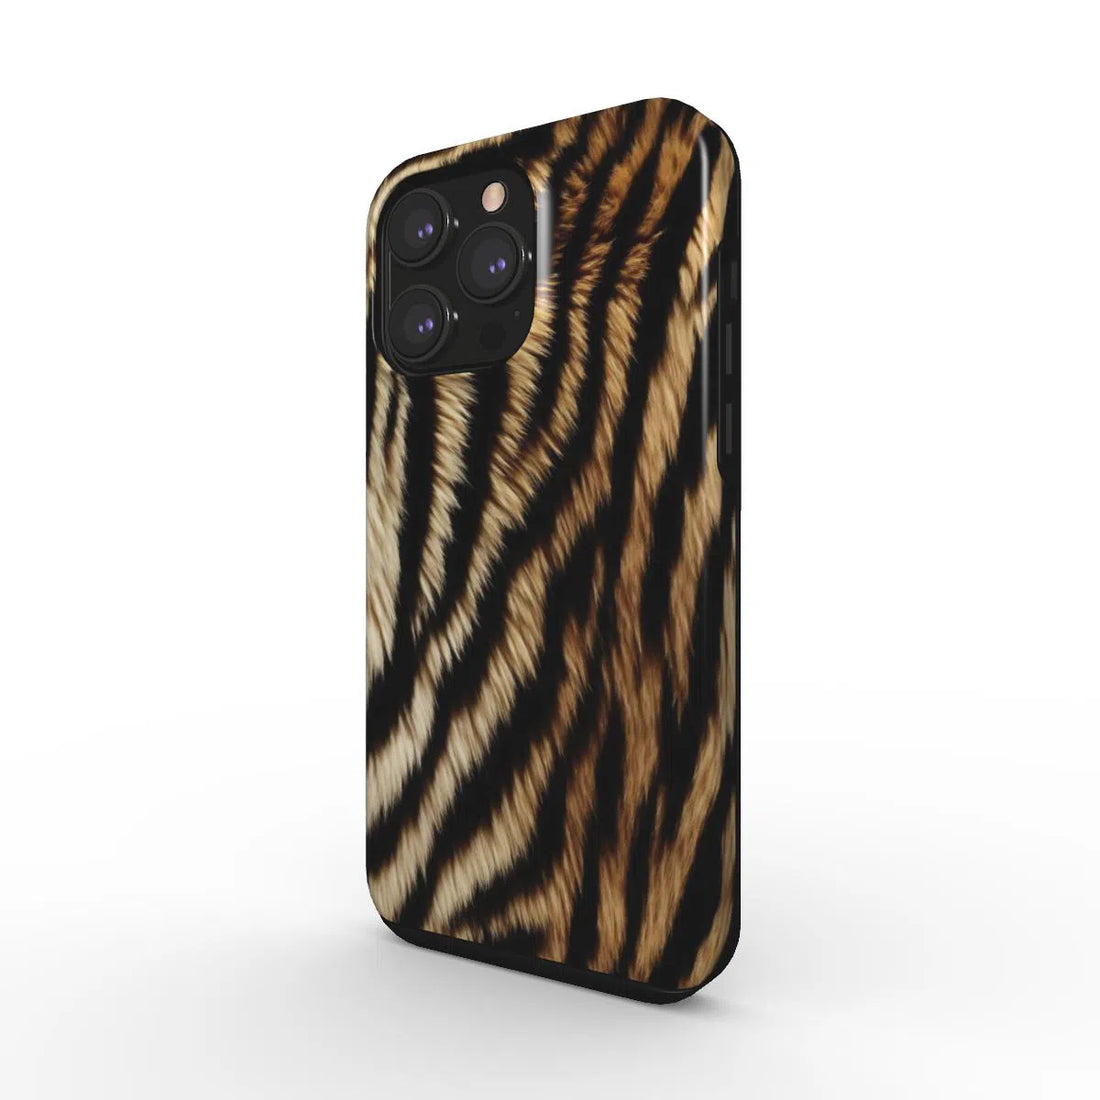 Faux Tiger Skin Tough Phone Case: Wild and Durable